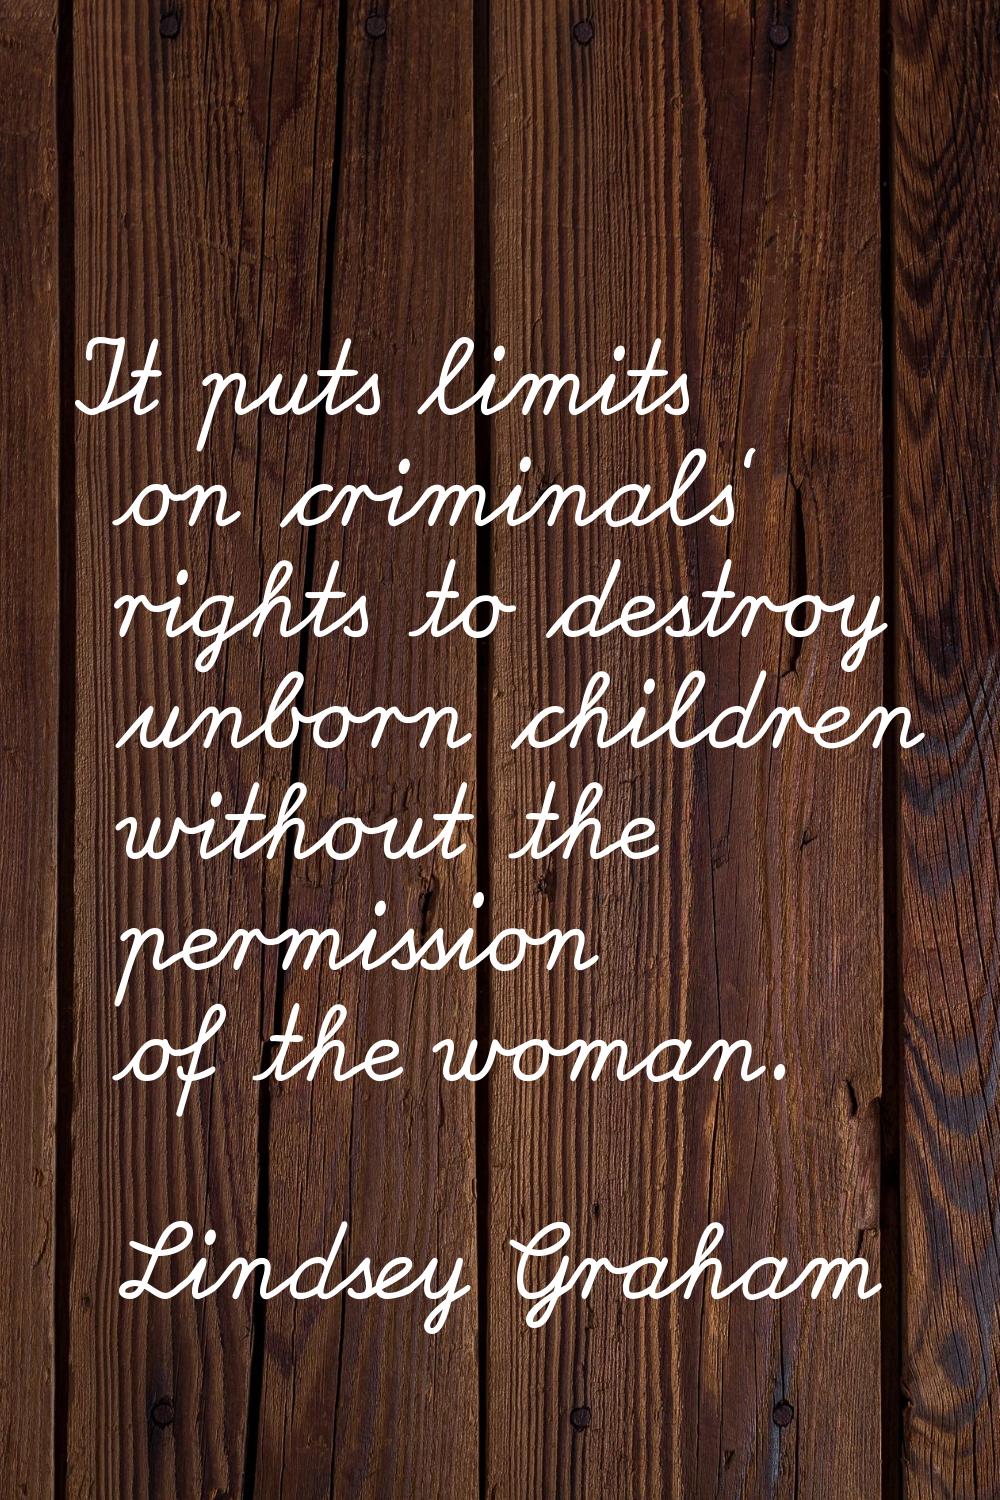 It puts limits on criminals' rights to destroy unborn children without the permission of the woman.